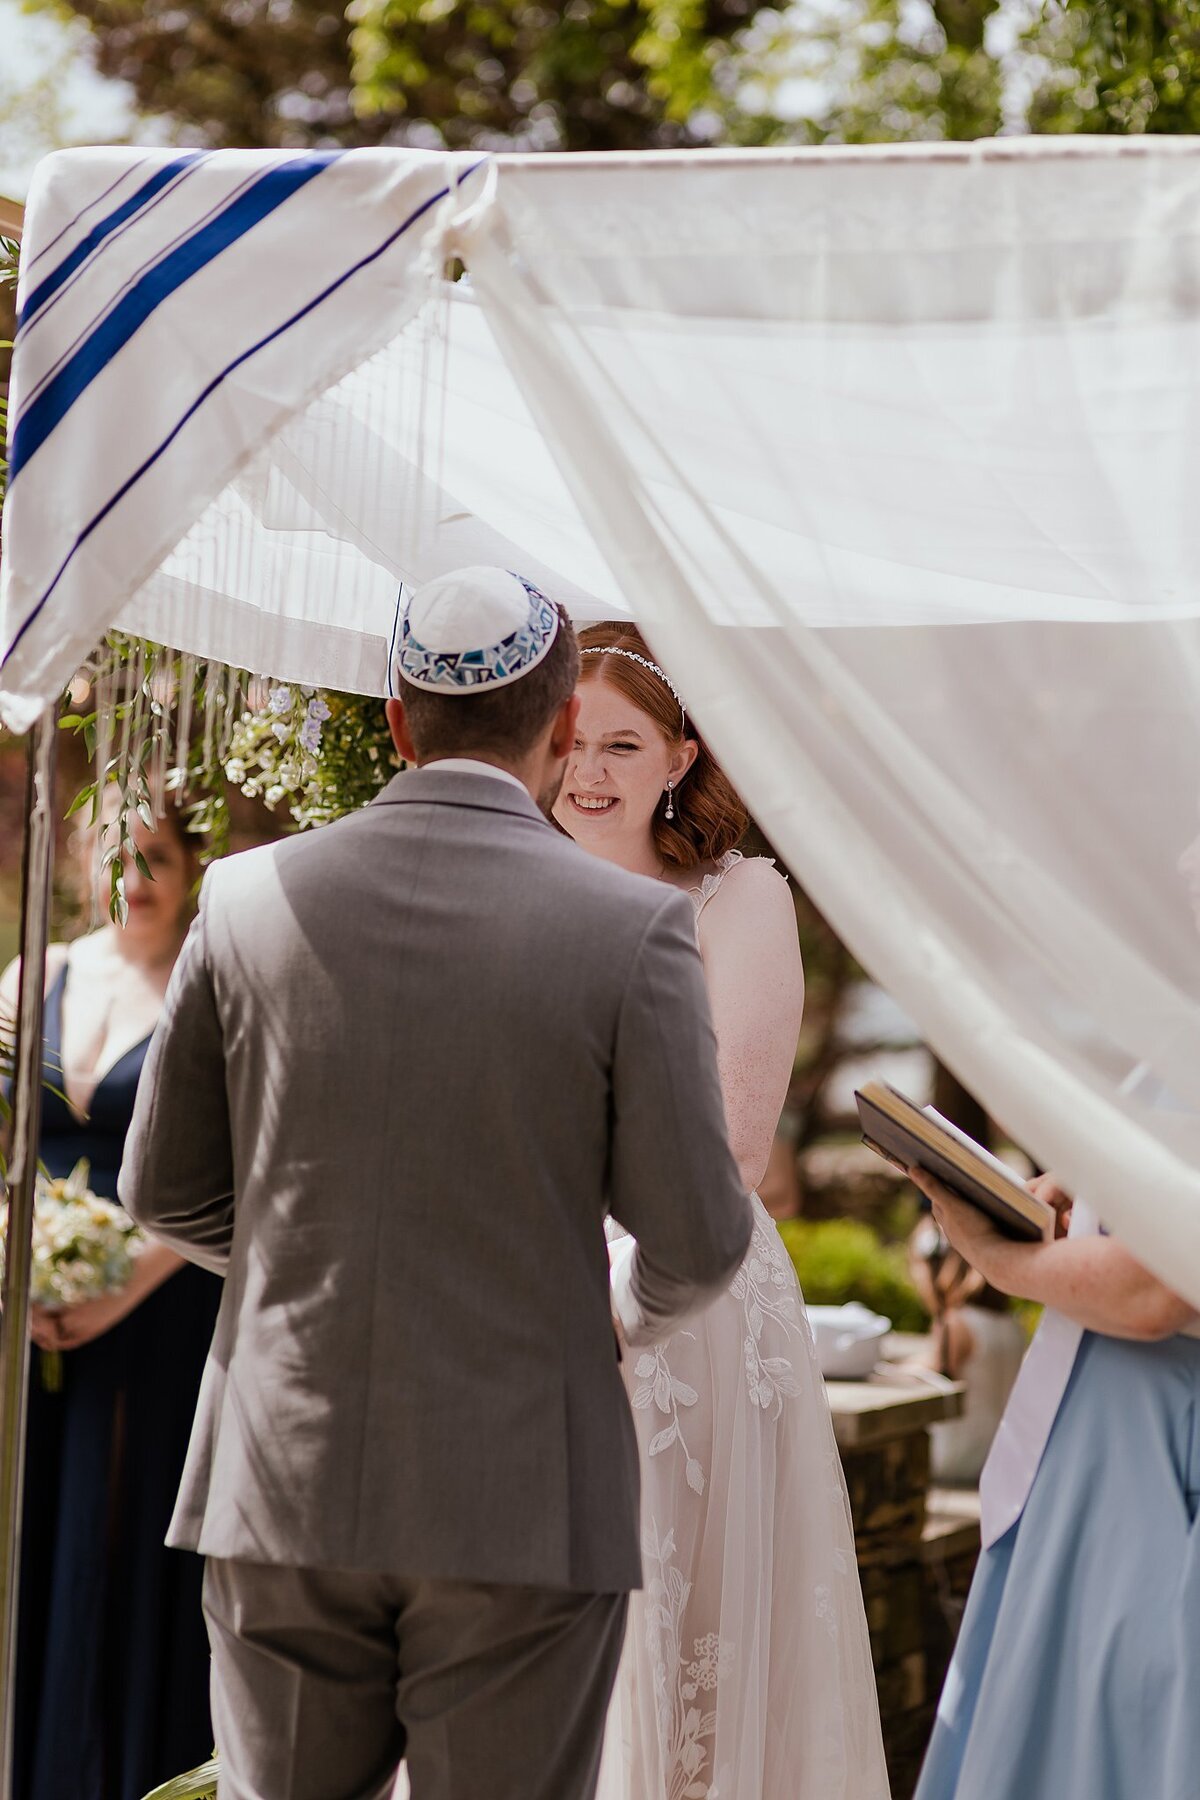 Red haired bride wearing a white lace wedding gown smiles at the groom wearing a blue and white kippot and light gray suit while standing under the chuppah with their officiant in a light blue dress.